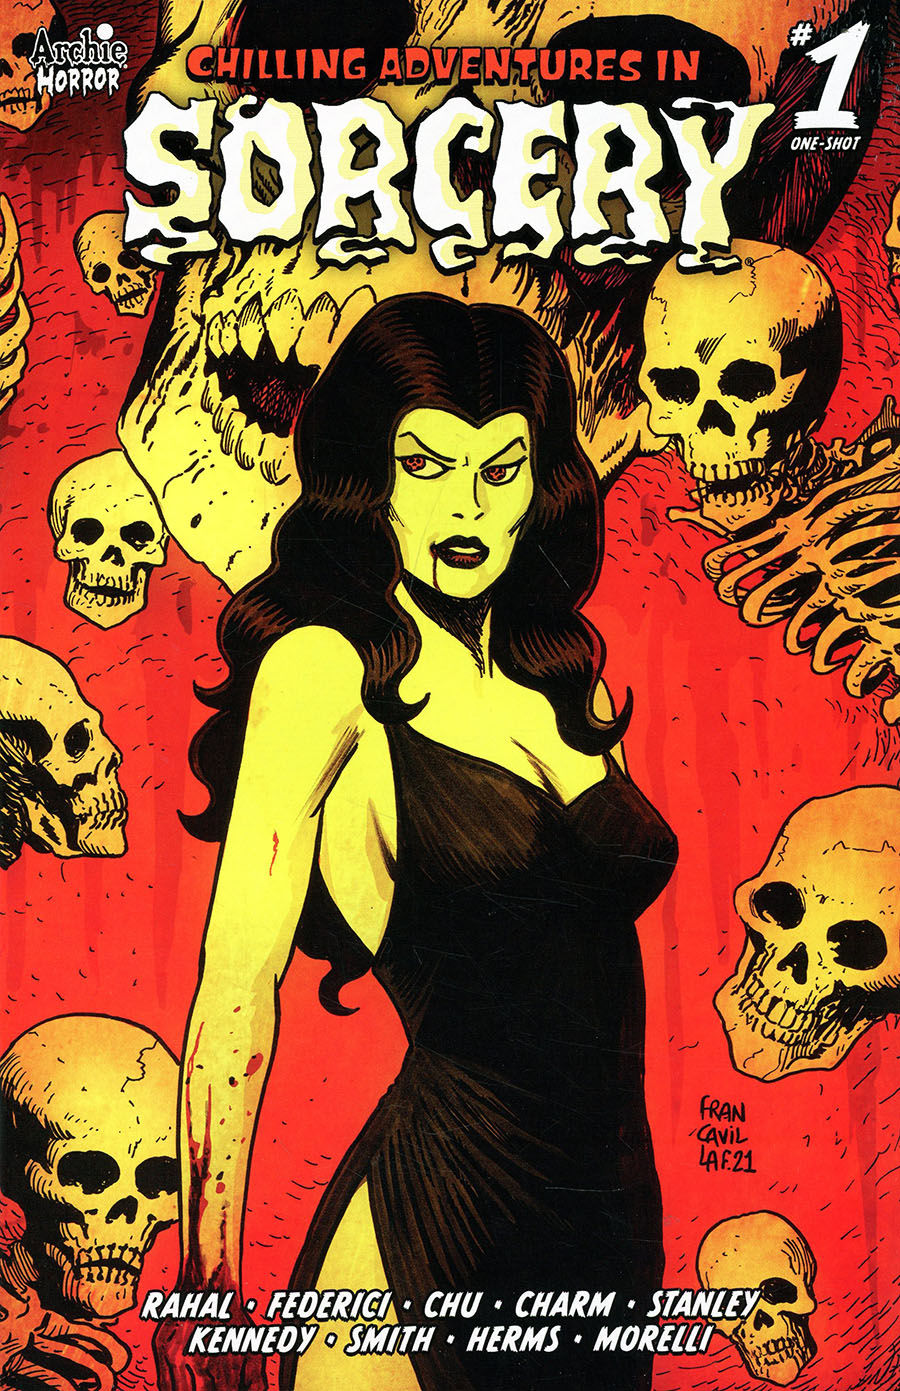 Chilling Adventures In Sorcery #1 (One Shot) Cover B Variant Francesco Francavilla Cover